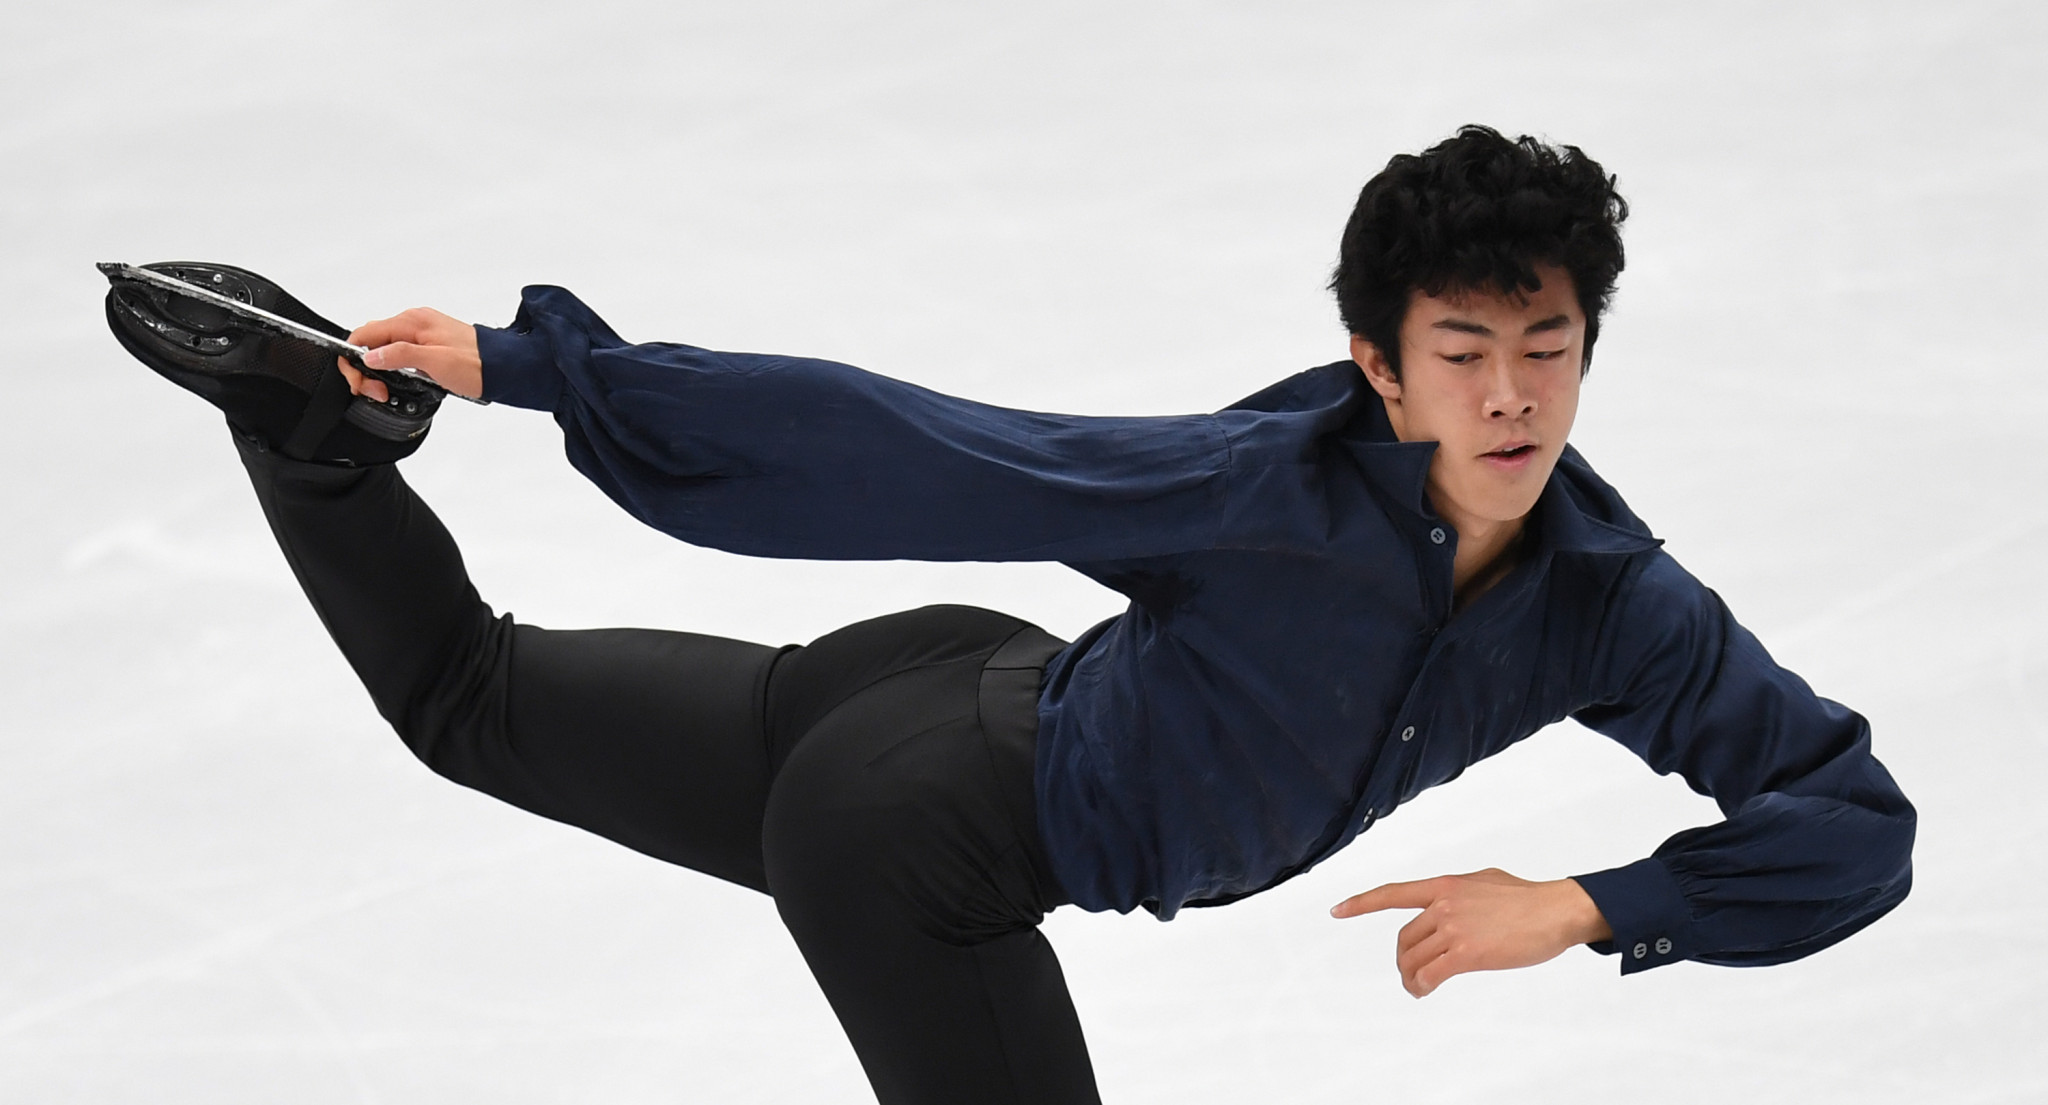 Chen wins men's event at ISU Grand Prix of Figure Skating in Moscow